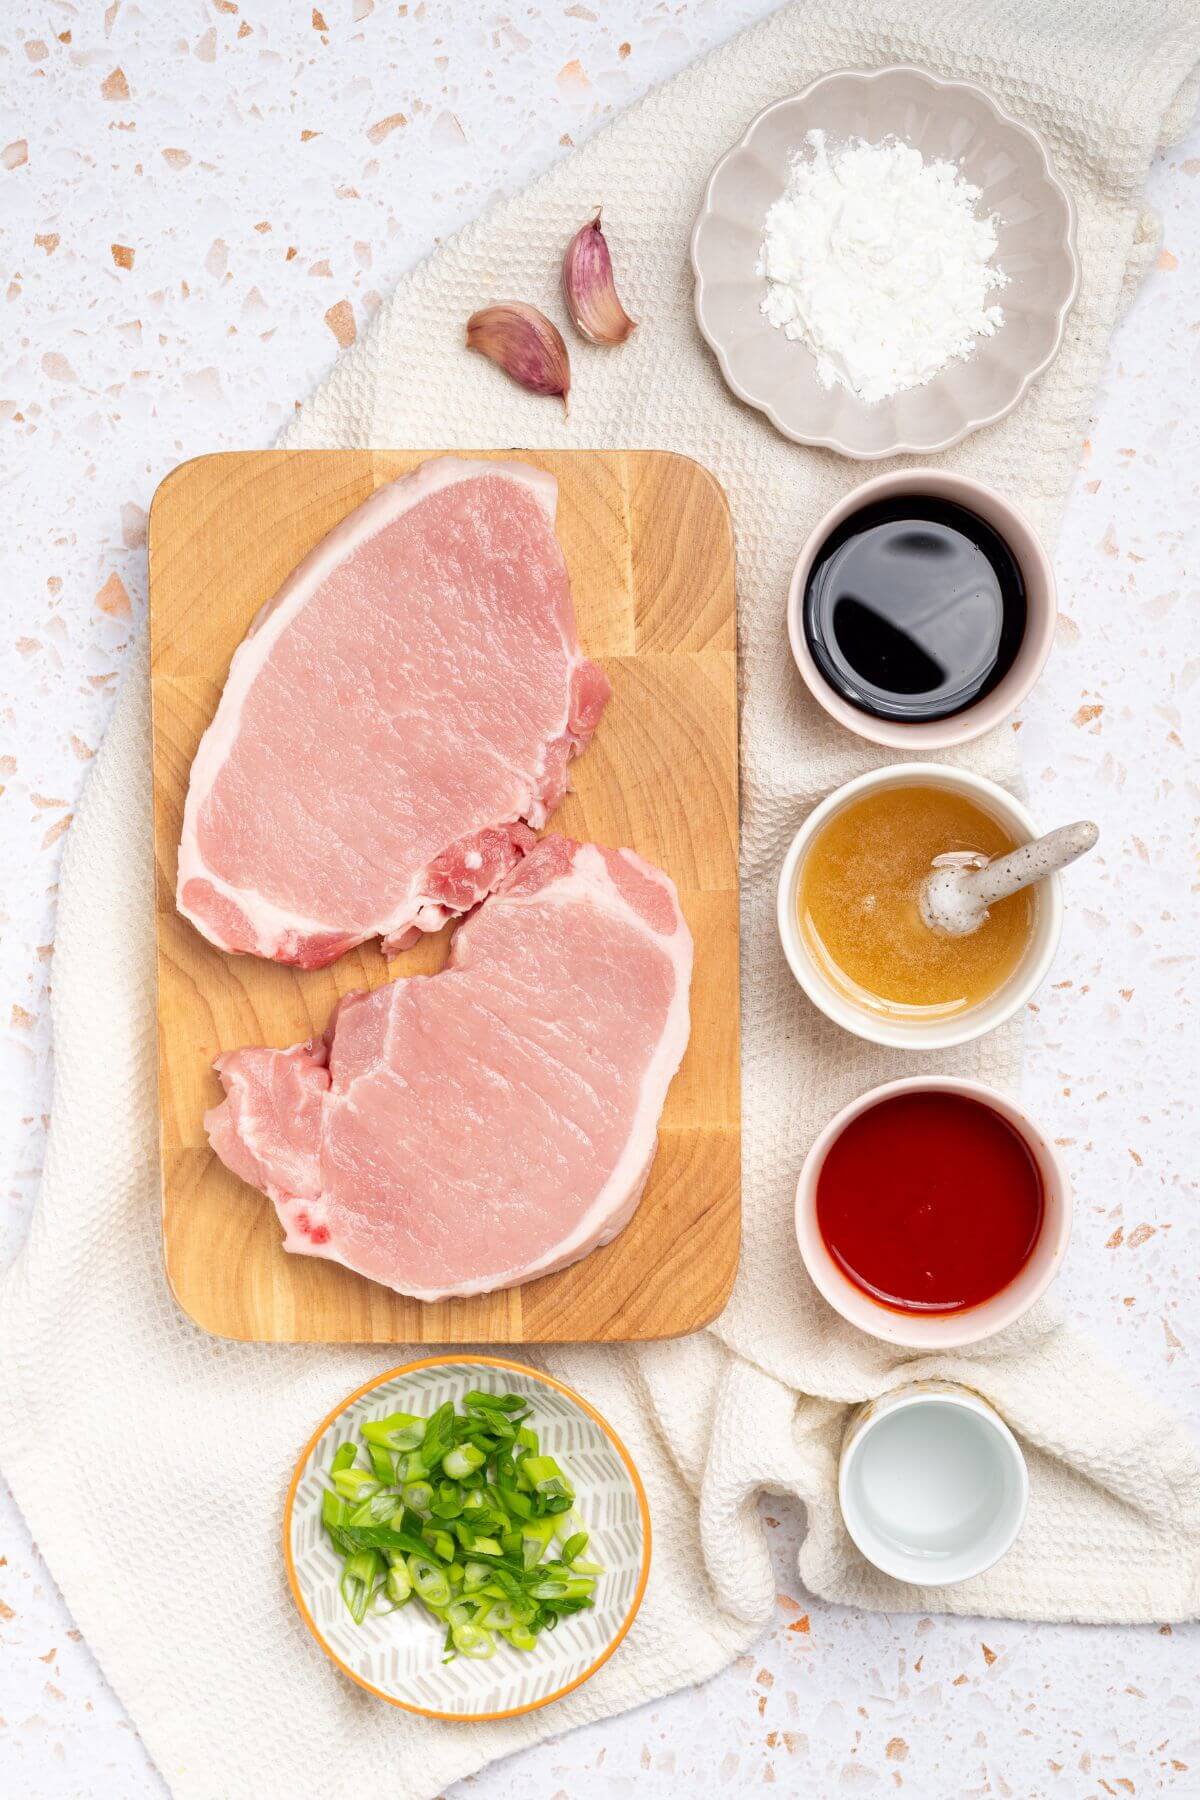 Pork chops on a cutting board with sauces and other ingredients.